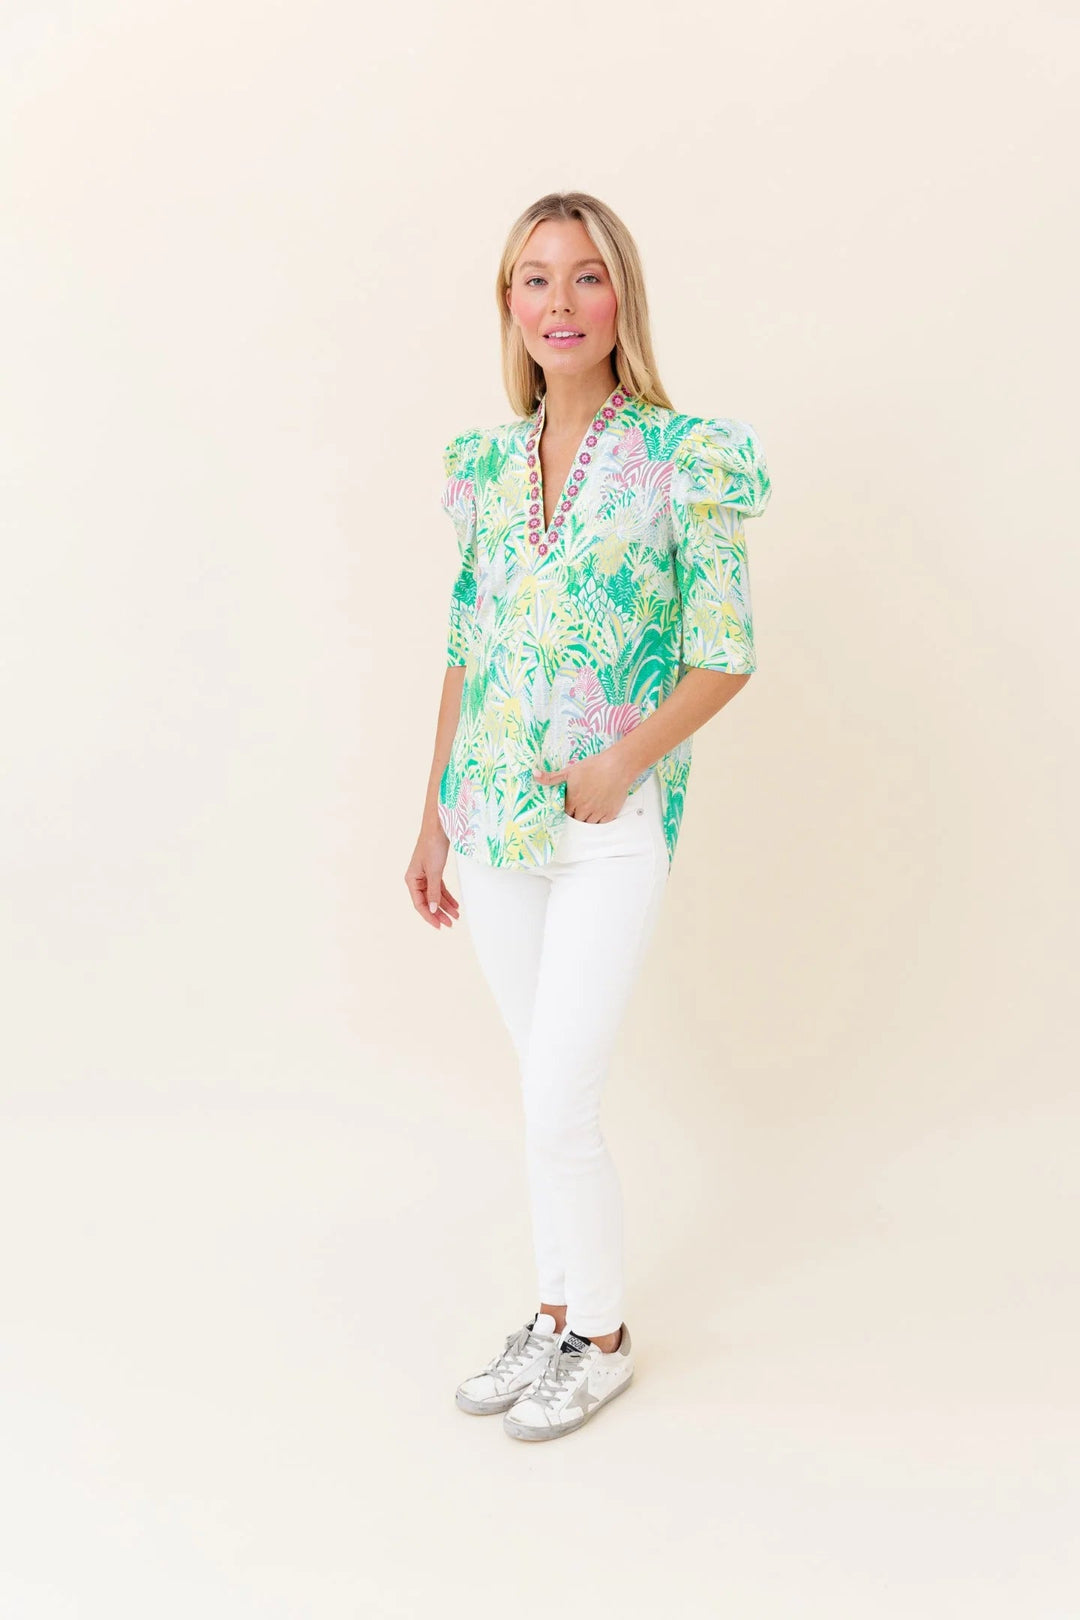 Sheridan French Top Natalie Blouse in Pink Punch Soirée